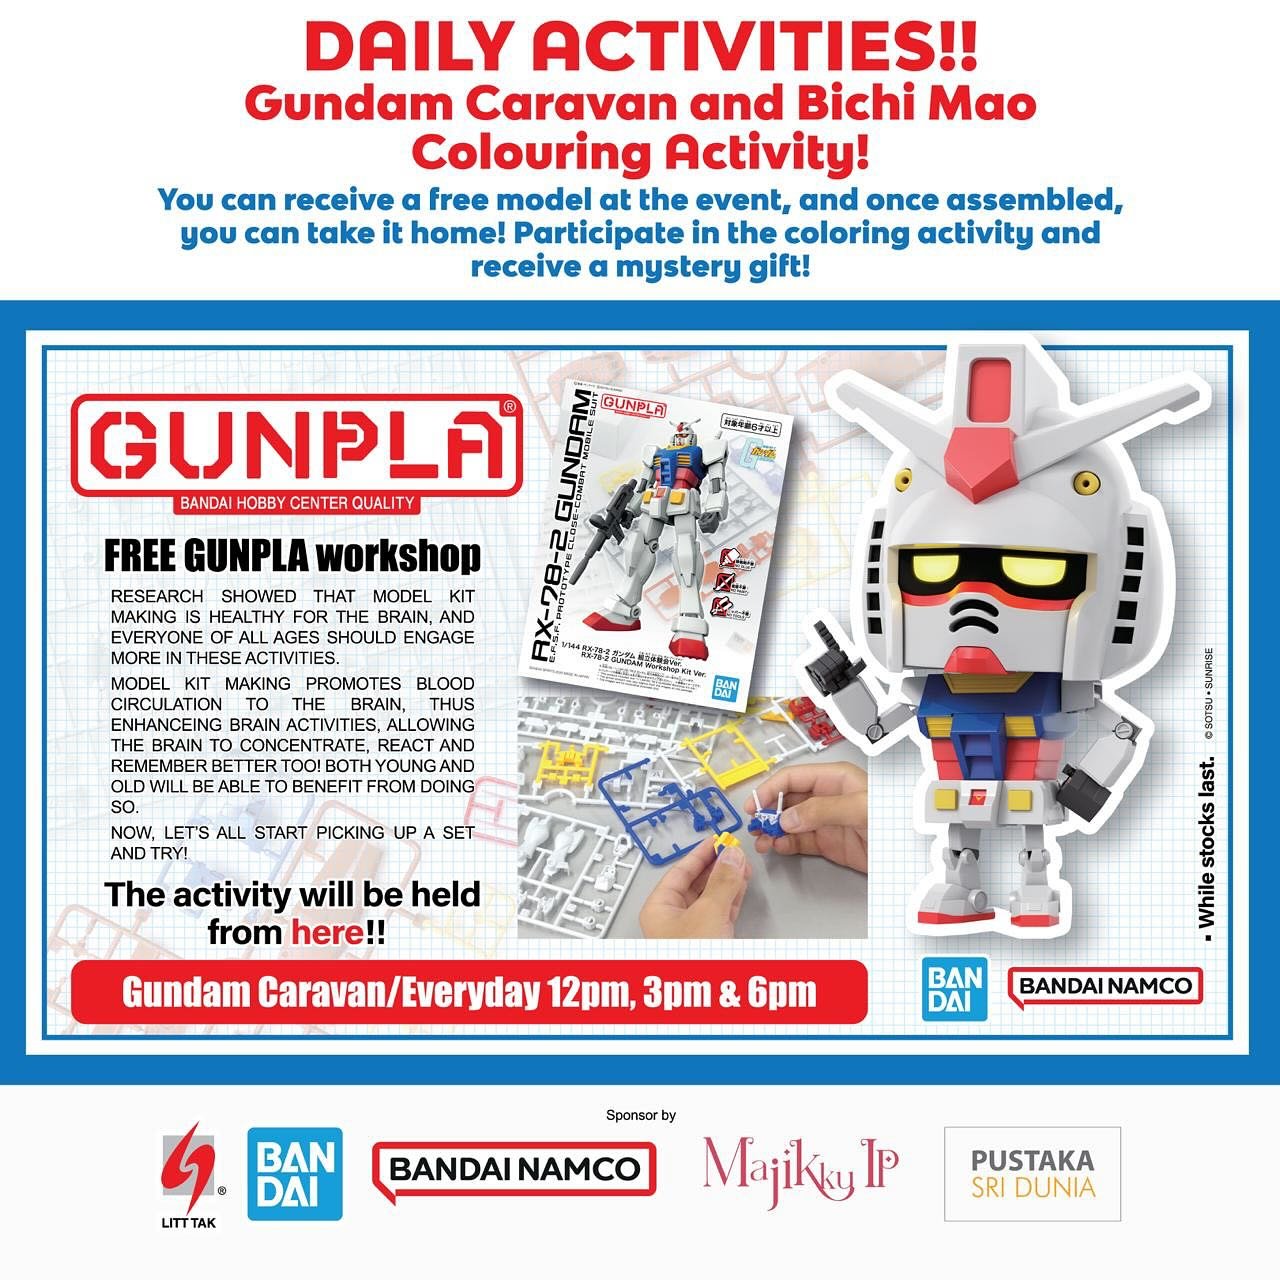 FREE GUNPLA WORKSHOP! Let&rsquo;s go and get your Gundam for FREE! 

Date: 1 - 12 May 2024
Venue: Centre Court, the Curve Mutiara Damansara 

#theCurve #theCurvemall #theCurveMutiaraDamansara #comicweek #gunpla #gundam